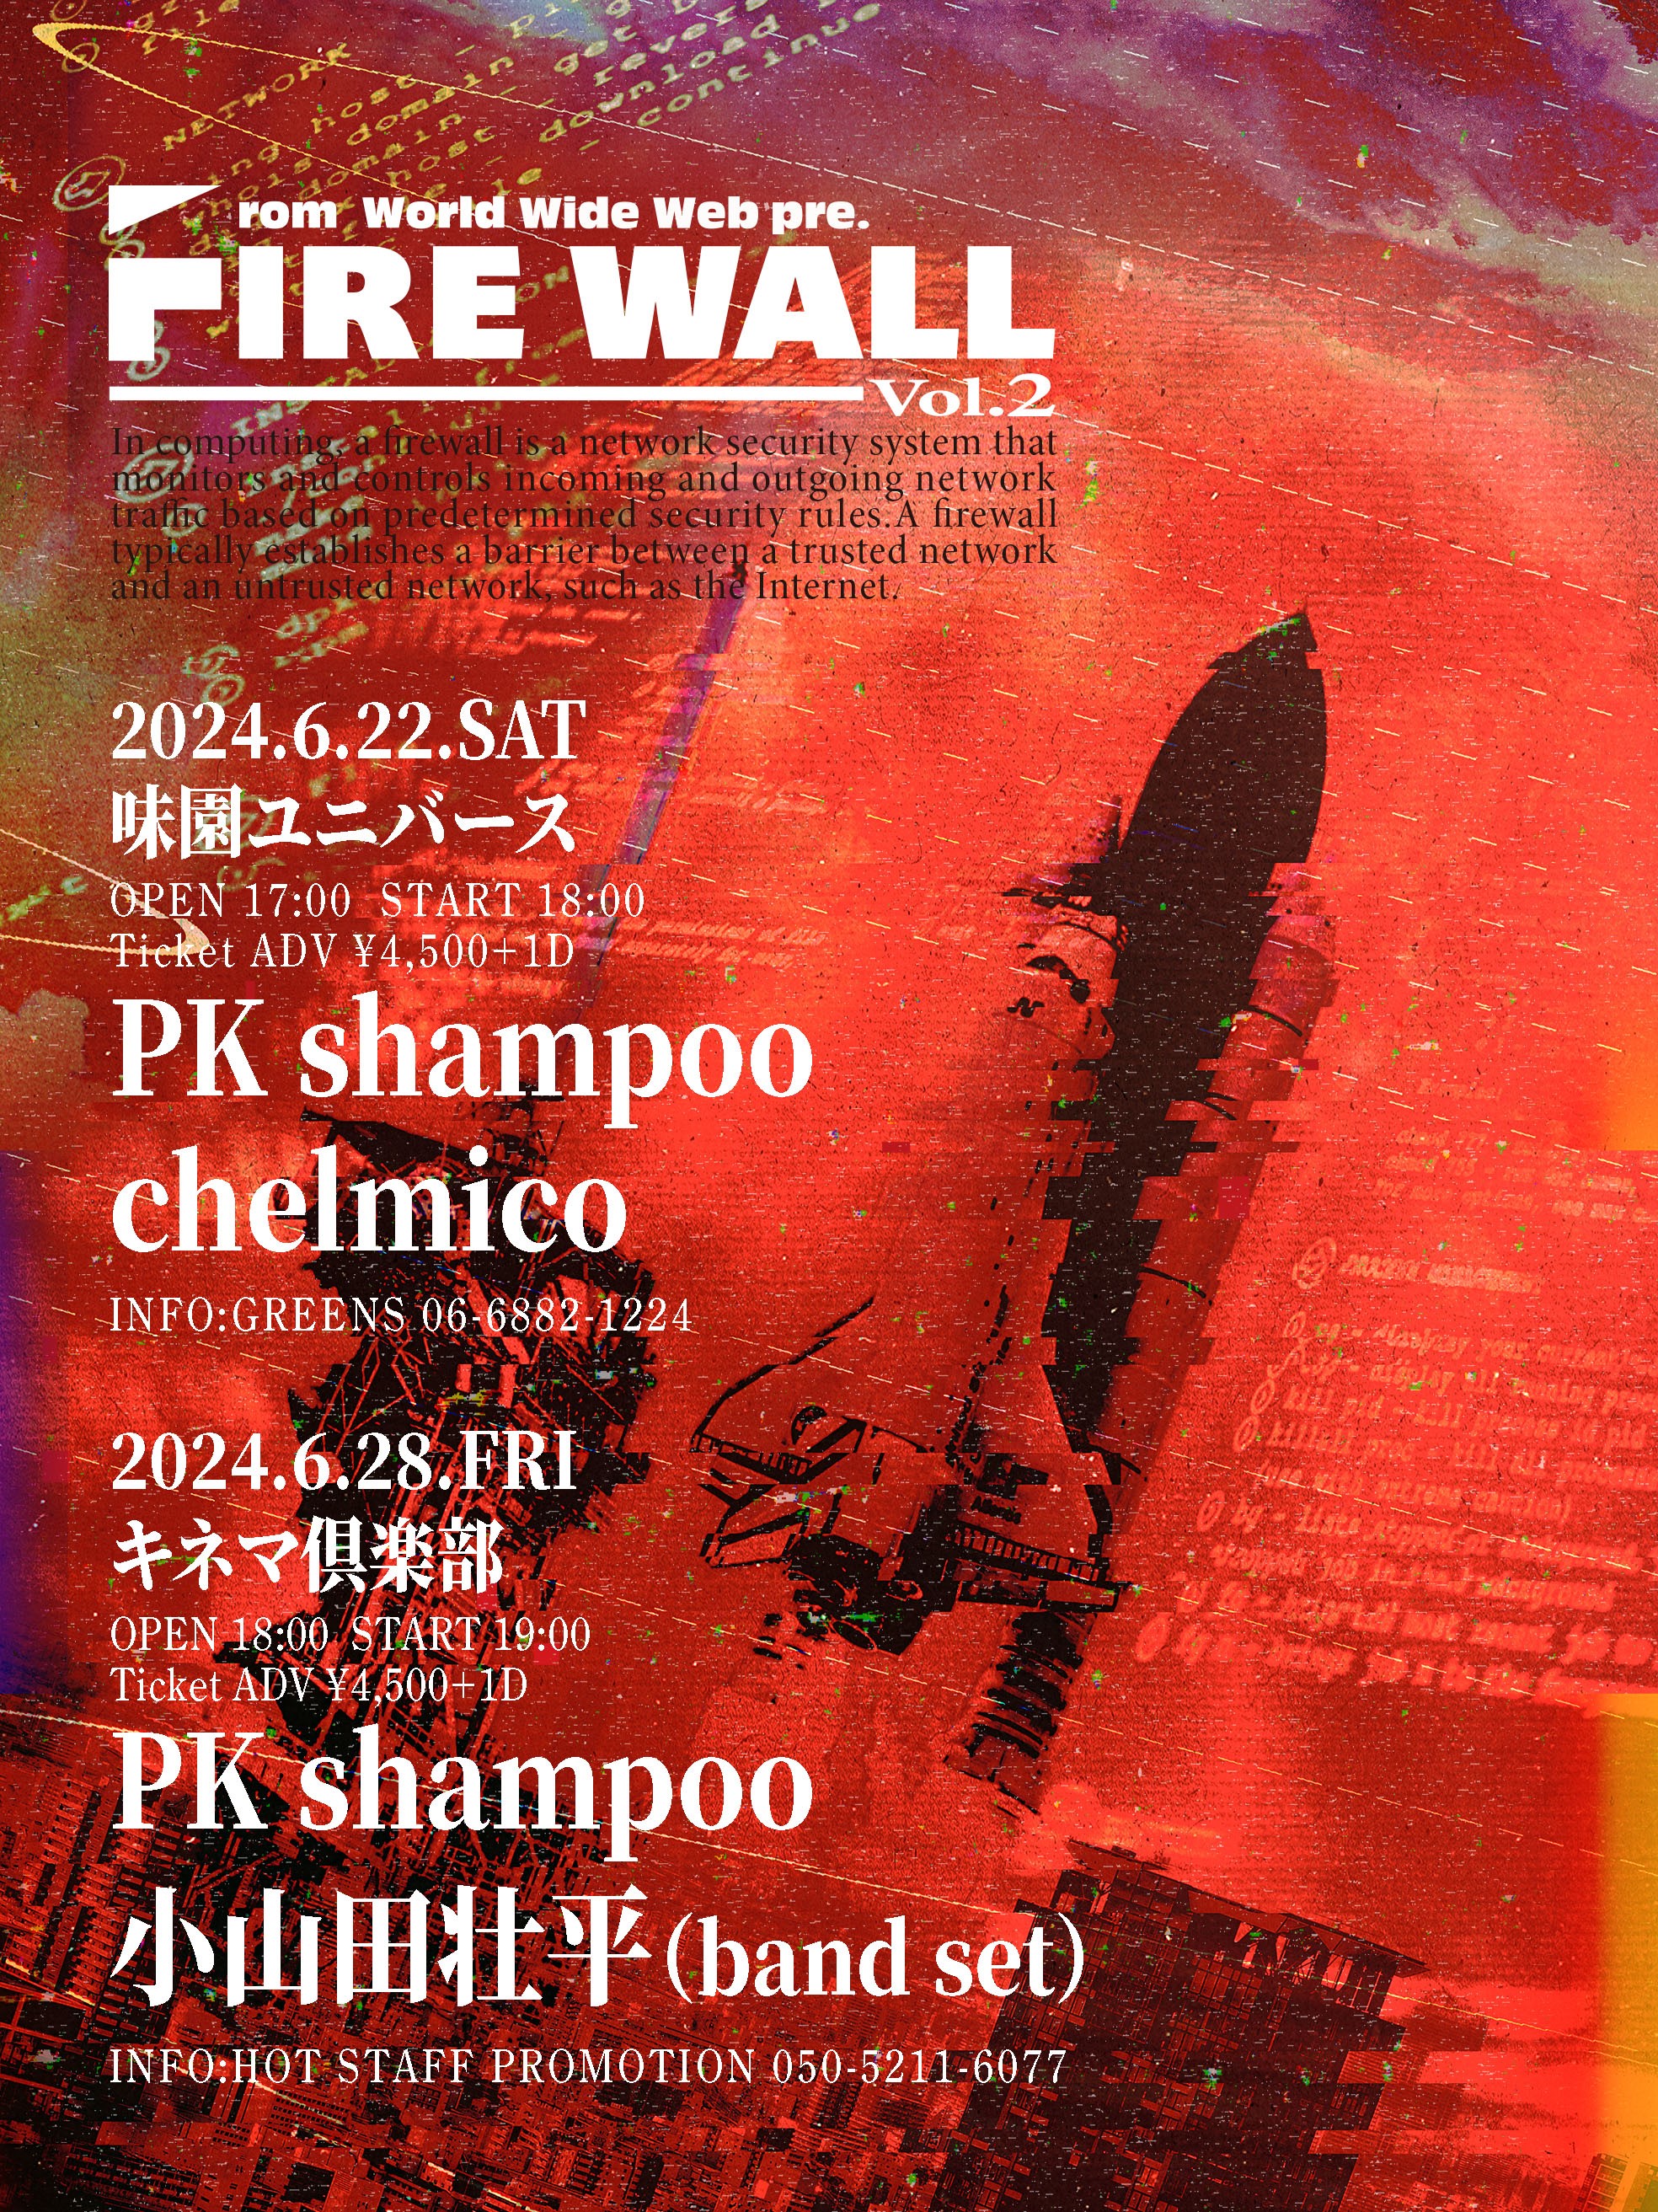 PK shampoo企画のツーマンシリーズ From World Wide Web pre.「FIRE WALL vol.2」ゲスト出演決定！